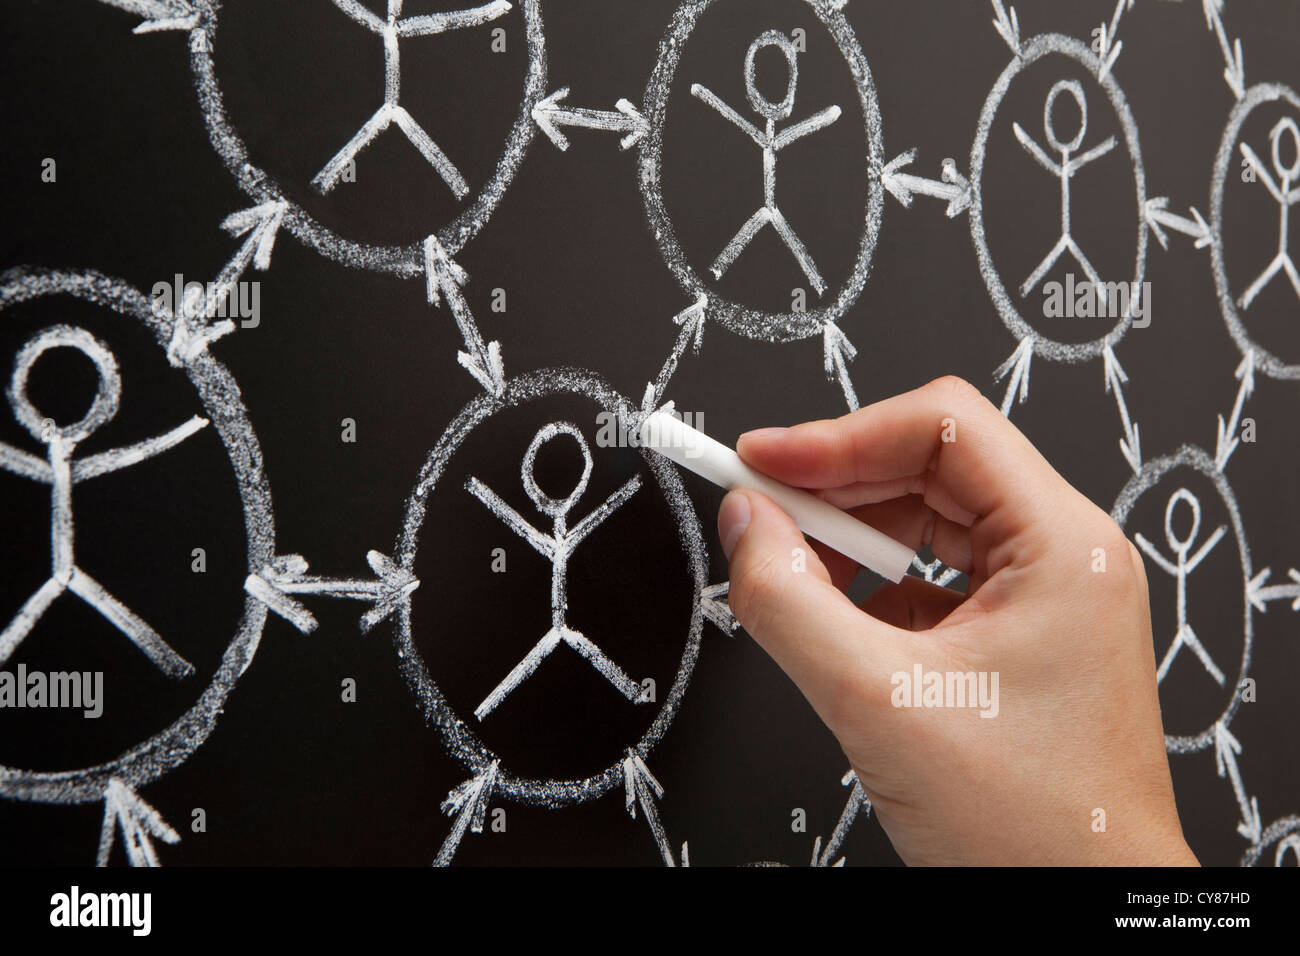 Hand showing social networking concept made with white chalk on a blackboard Stock Photo